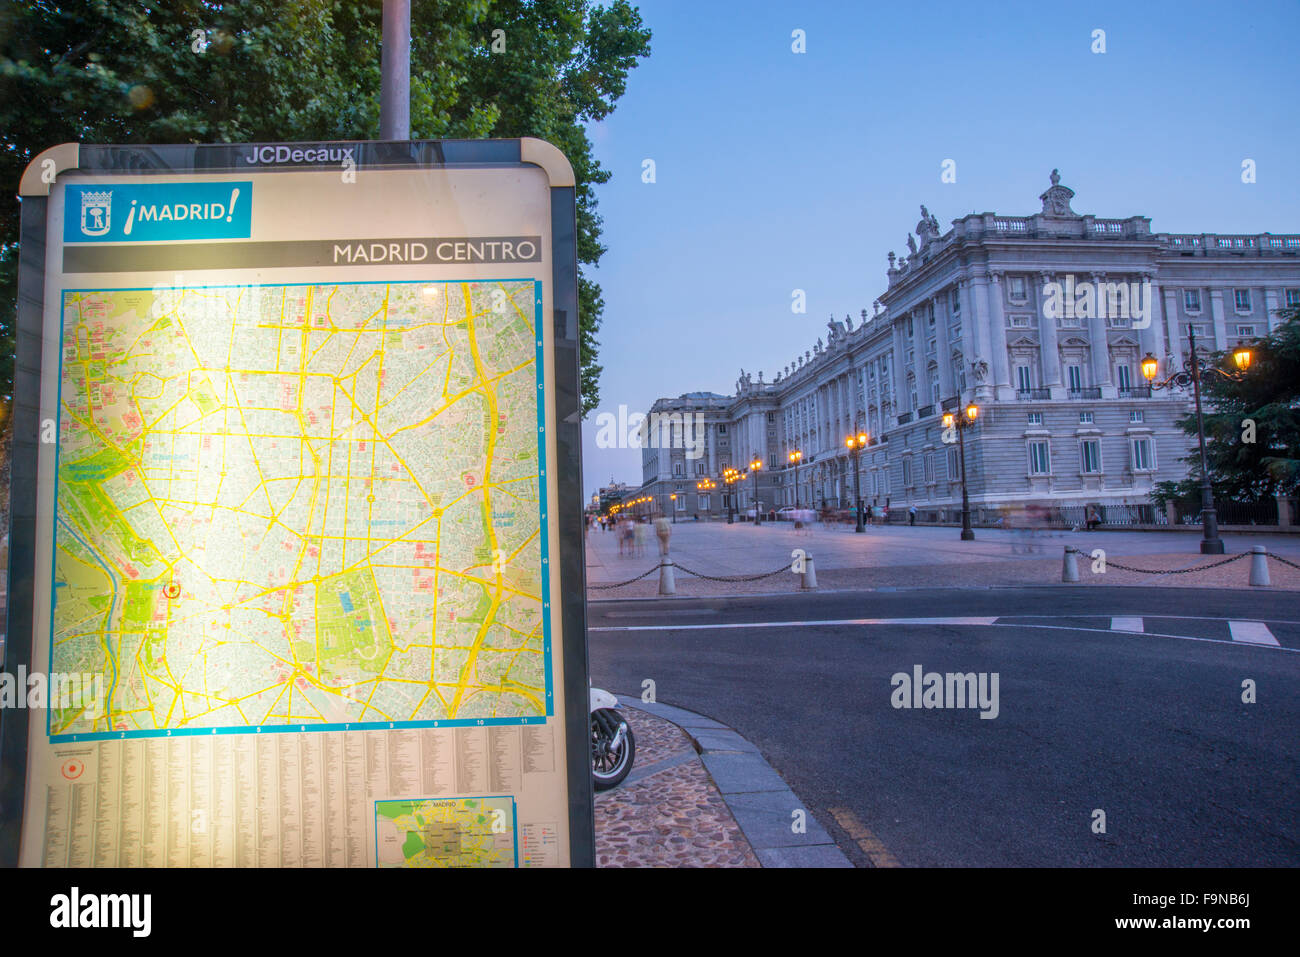 City map and Royal Palace, night view. Bailen street, Madrid, Spain. Stock Photo